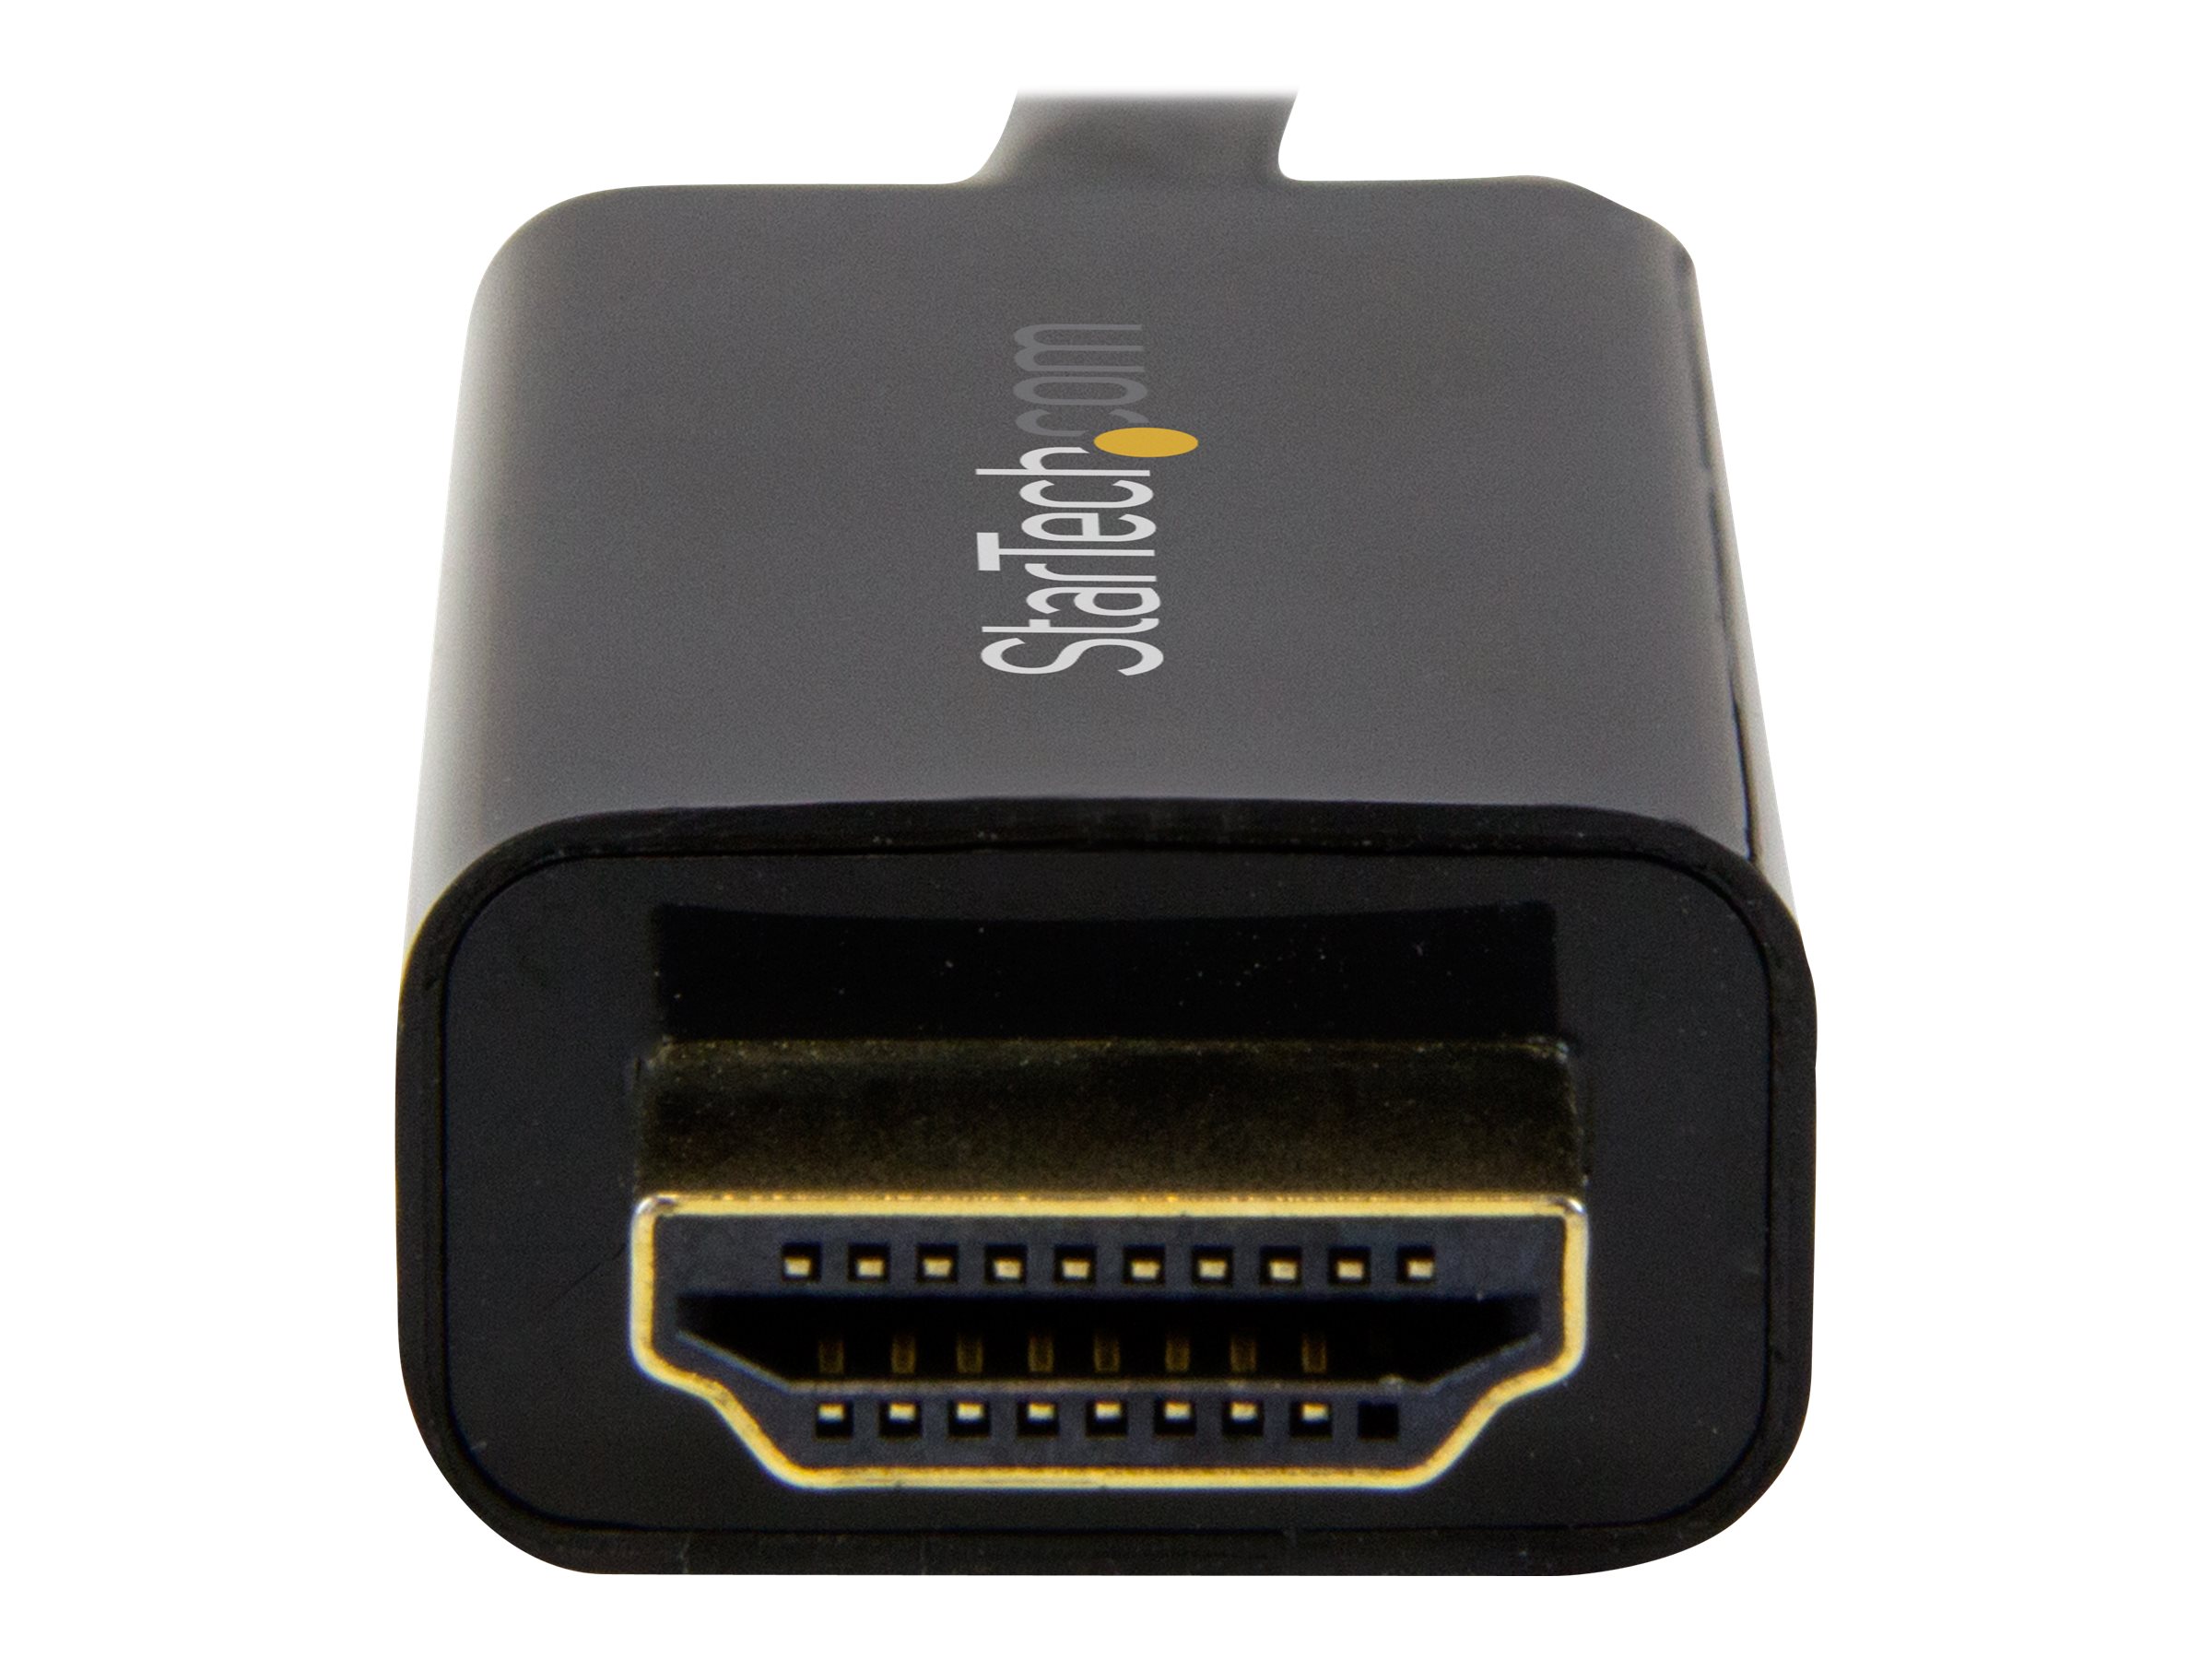 StarTech.com DisplayPort to HDMI Adapter - 1080p DP to HDMI Converter -  Passive Video Adapter Dongle